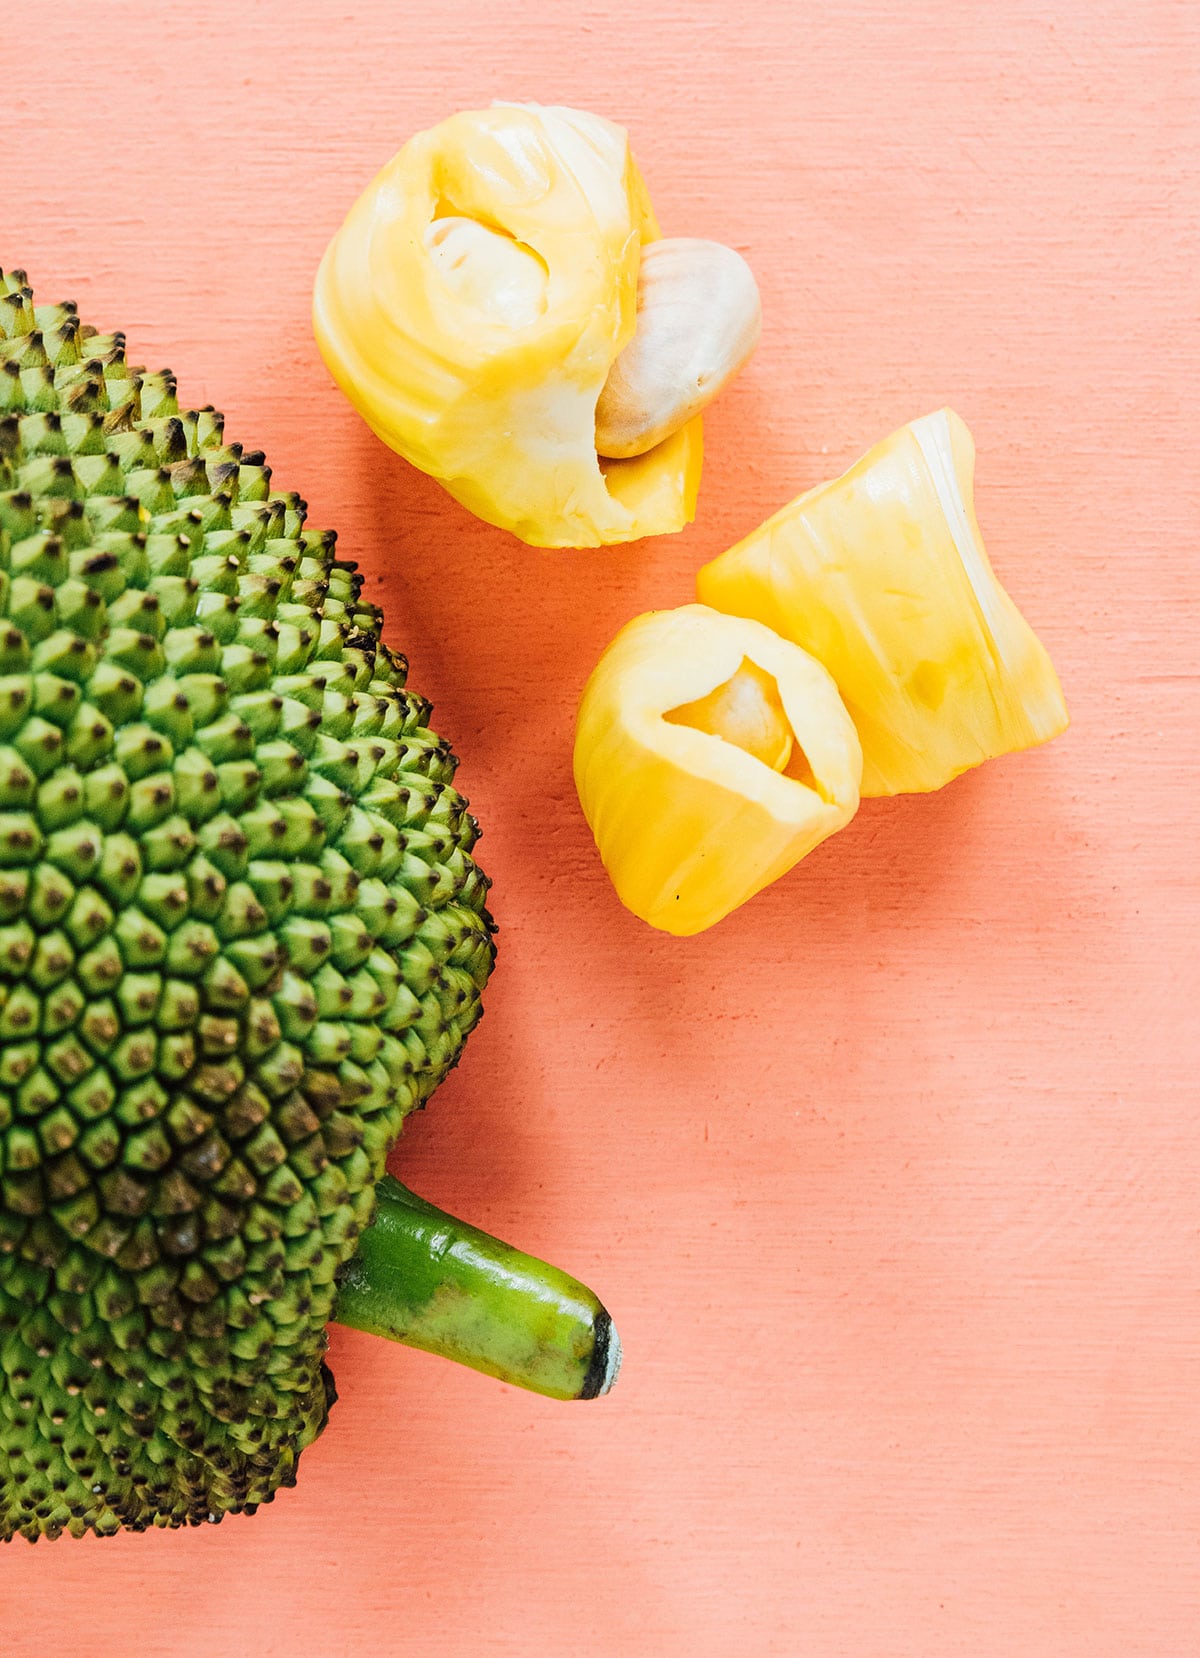 Jackfruit seeds in their yellow pods next to the skin of the jackfruit.